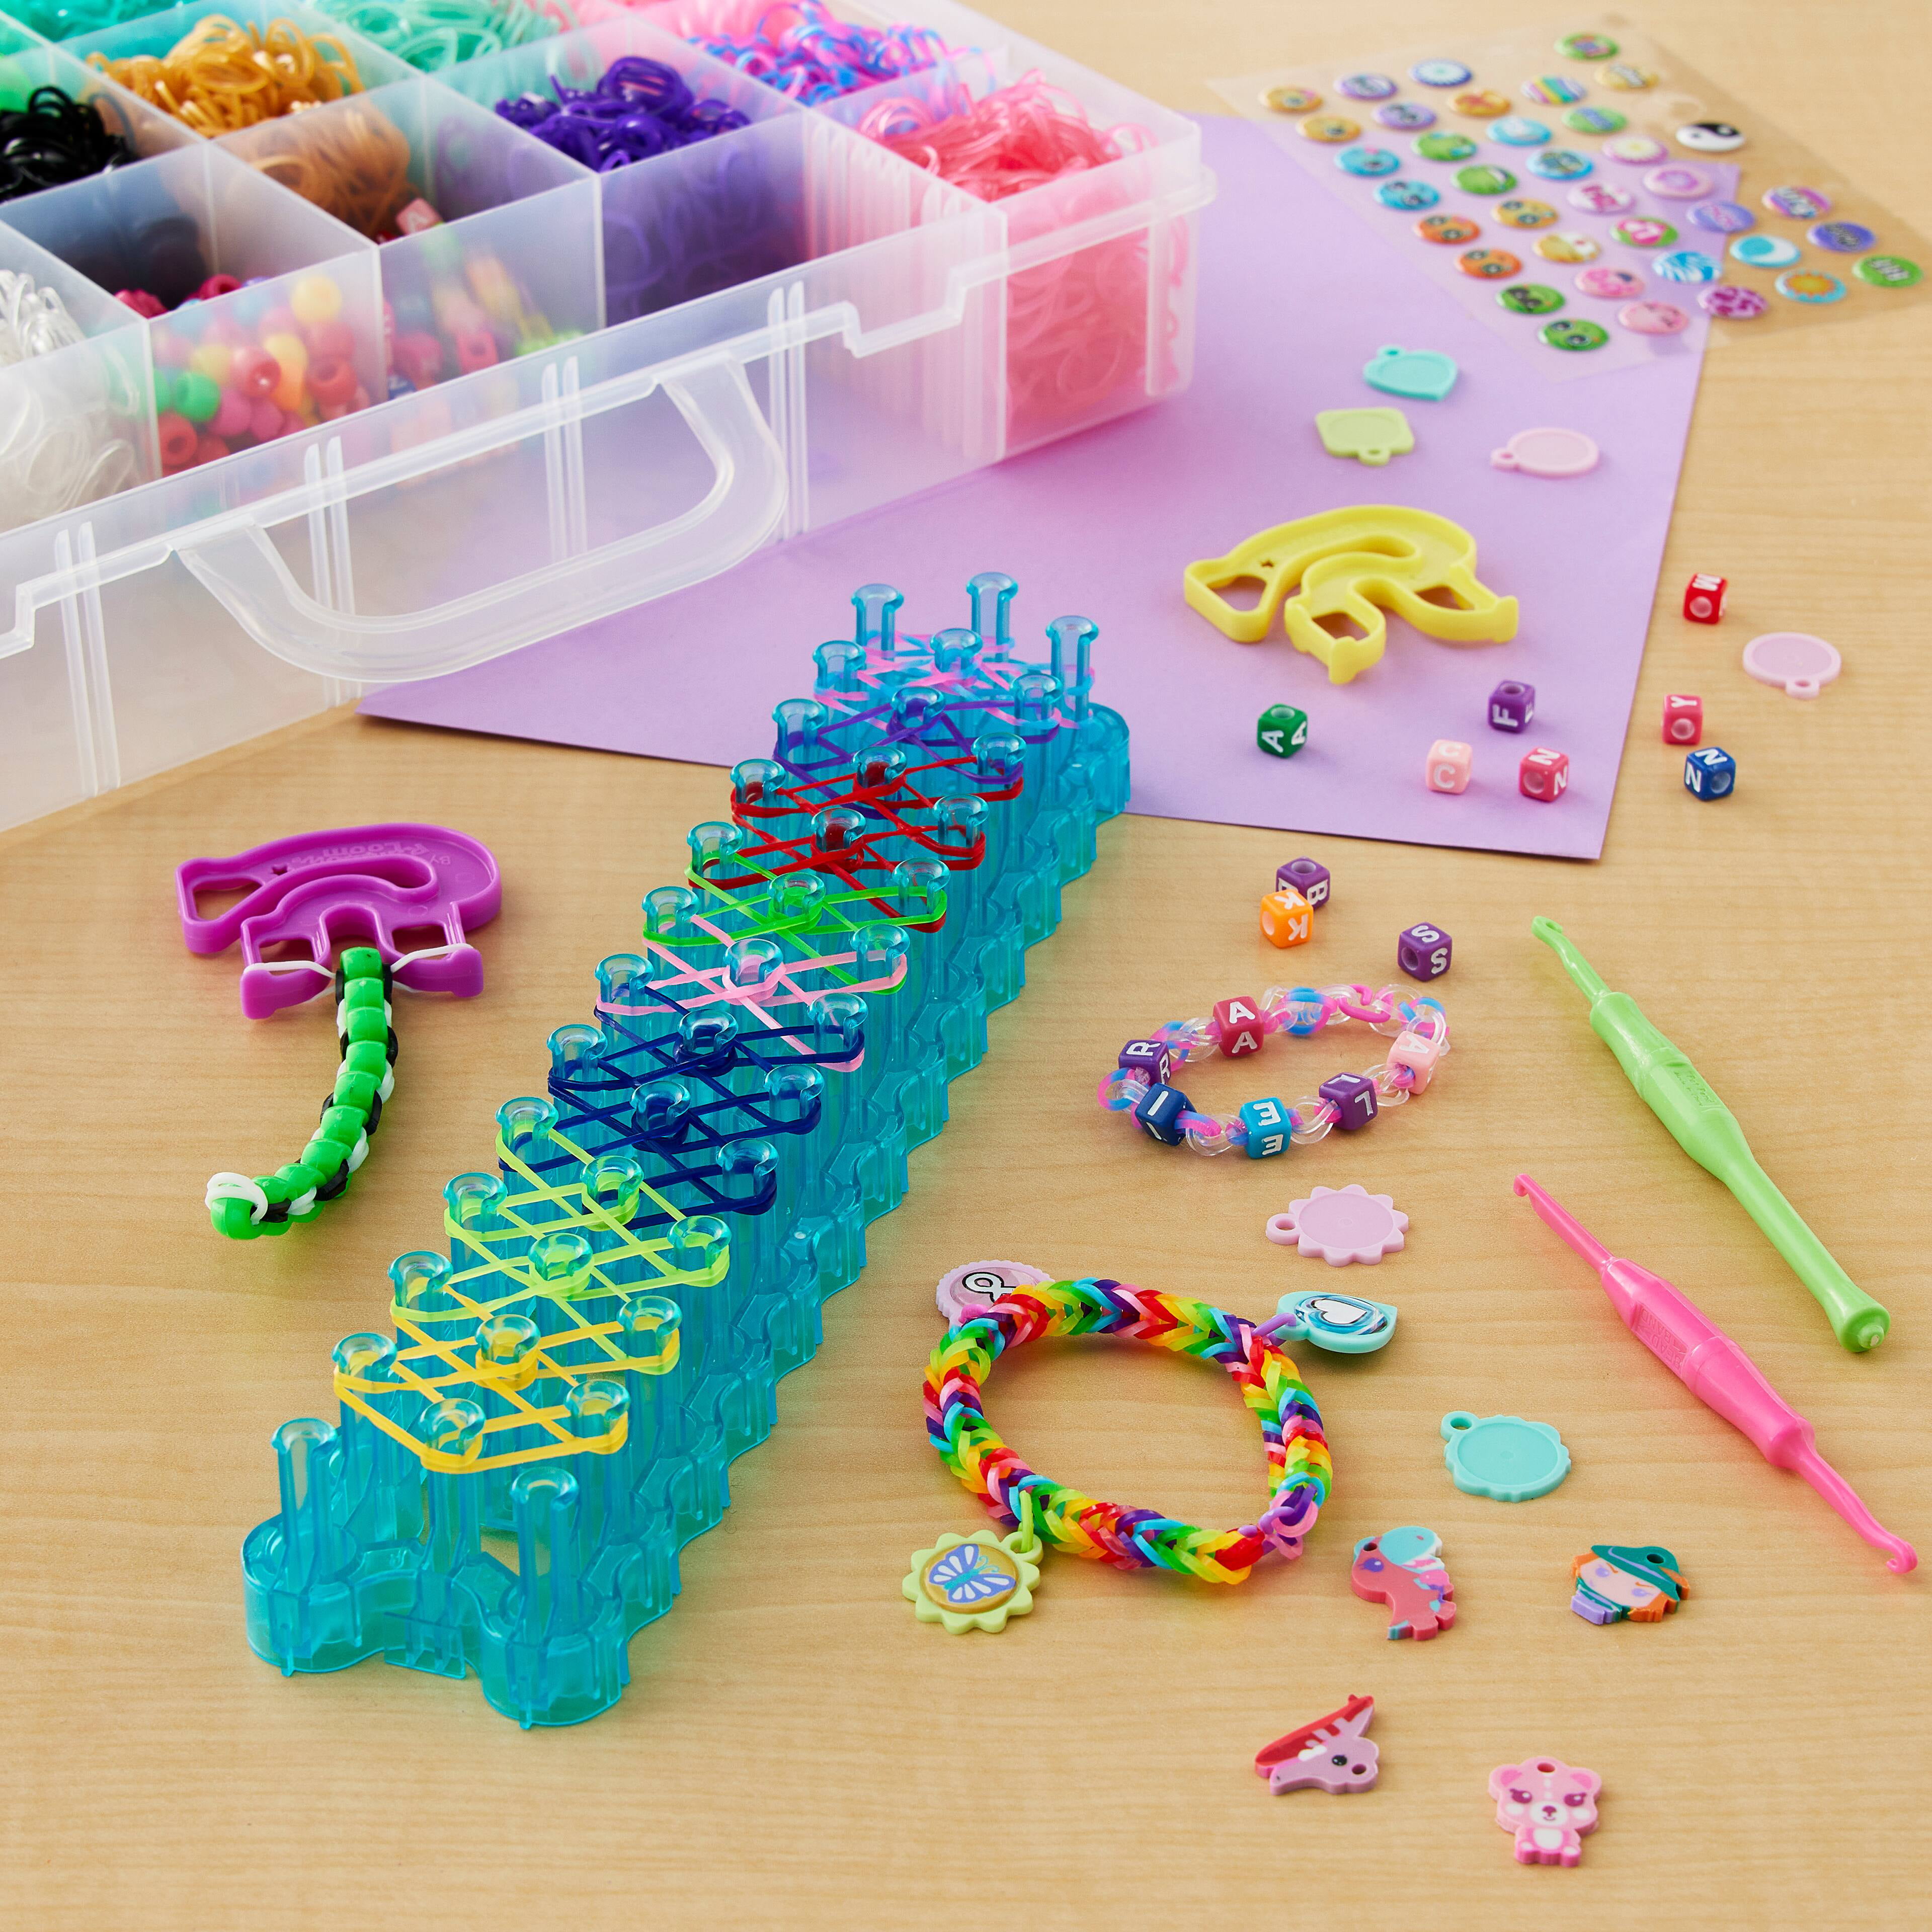 Rubber Band Bracelet Kit, Loom Bracelet Making Kit for DIY Art and  Craft,4800 pcs with Storage Container,Charms,Y-Looms,Crochet Hooks and  S-Clips (4800 Pcs) : Amazon.in: Home & Kitchen